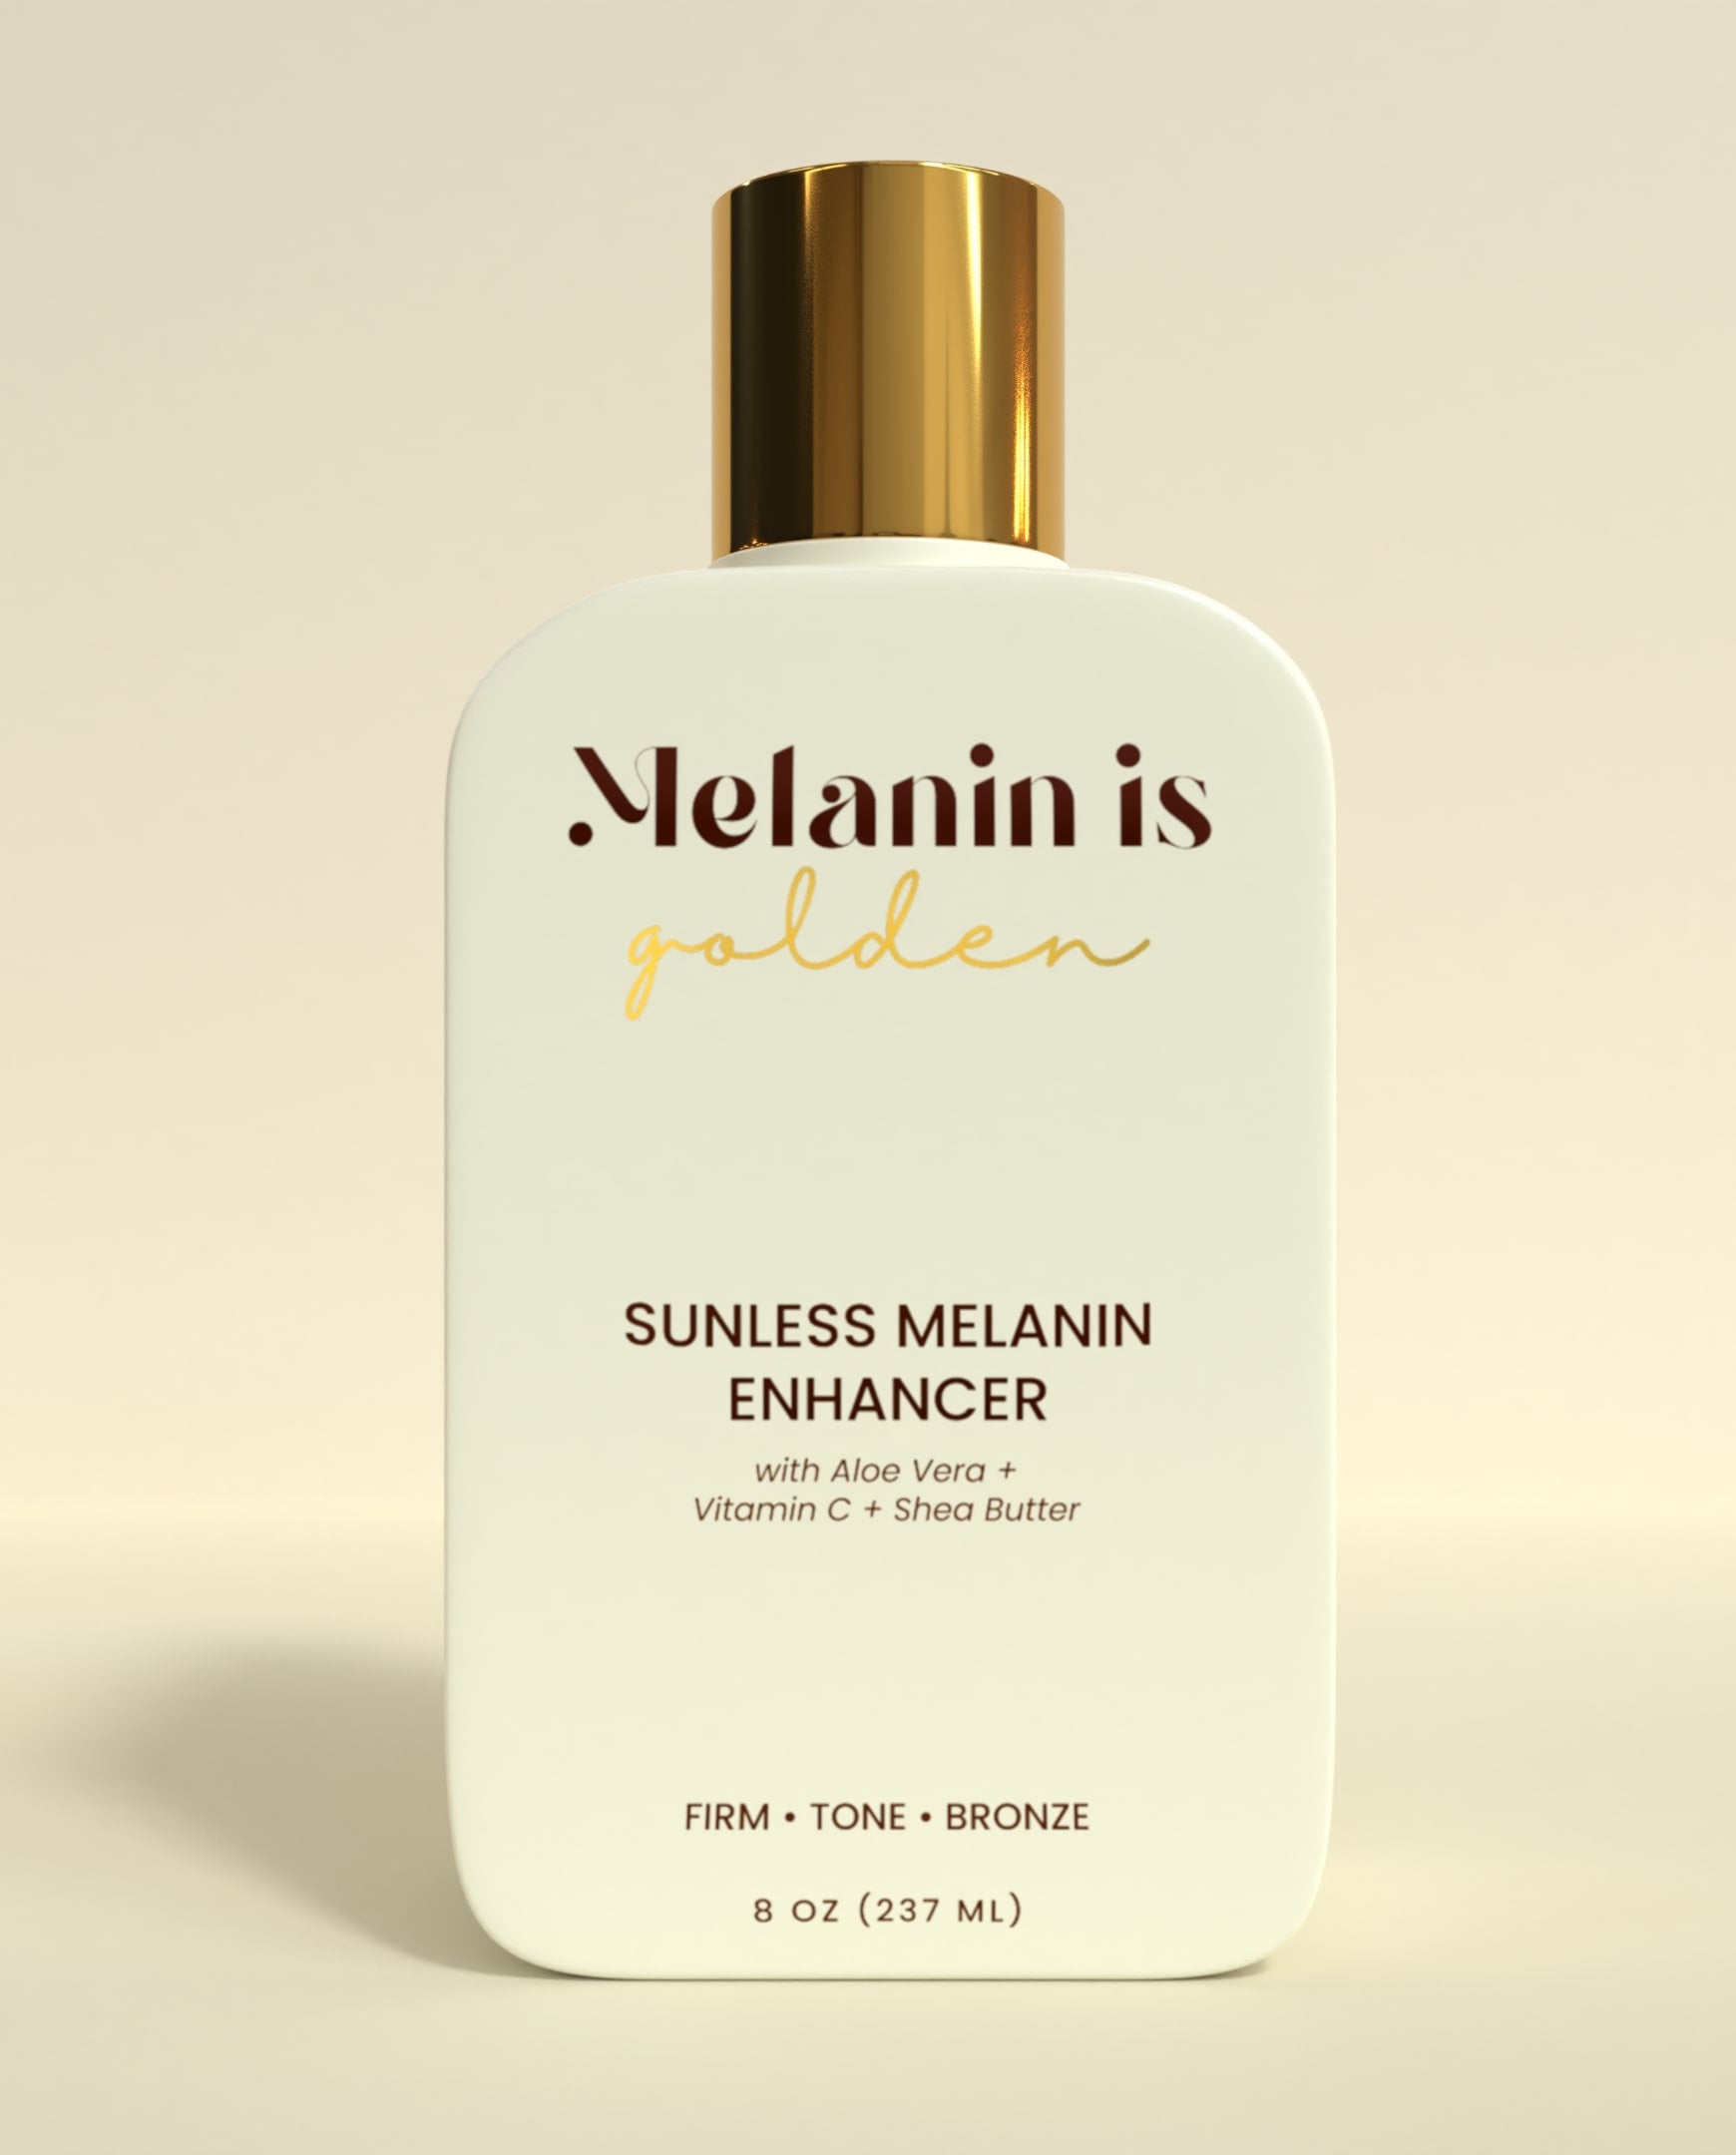 Get a natural-looking, sun-kissed glow with Melanin is... Sunless Melanin Enhancer. Formulated specifically for melanated skin tones, this cream uses natural ingredients to enhance and deepen your skin's natural melanin for a radiant and even complexion. Perfect for those who want to achieve a sun-kissed look without the damaging effects of UV rays.